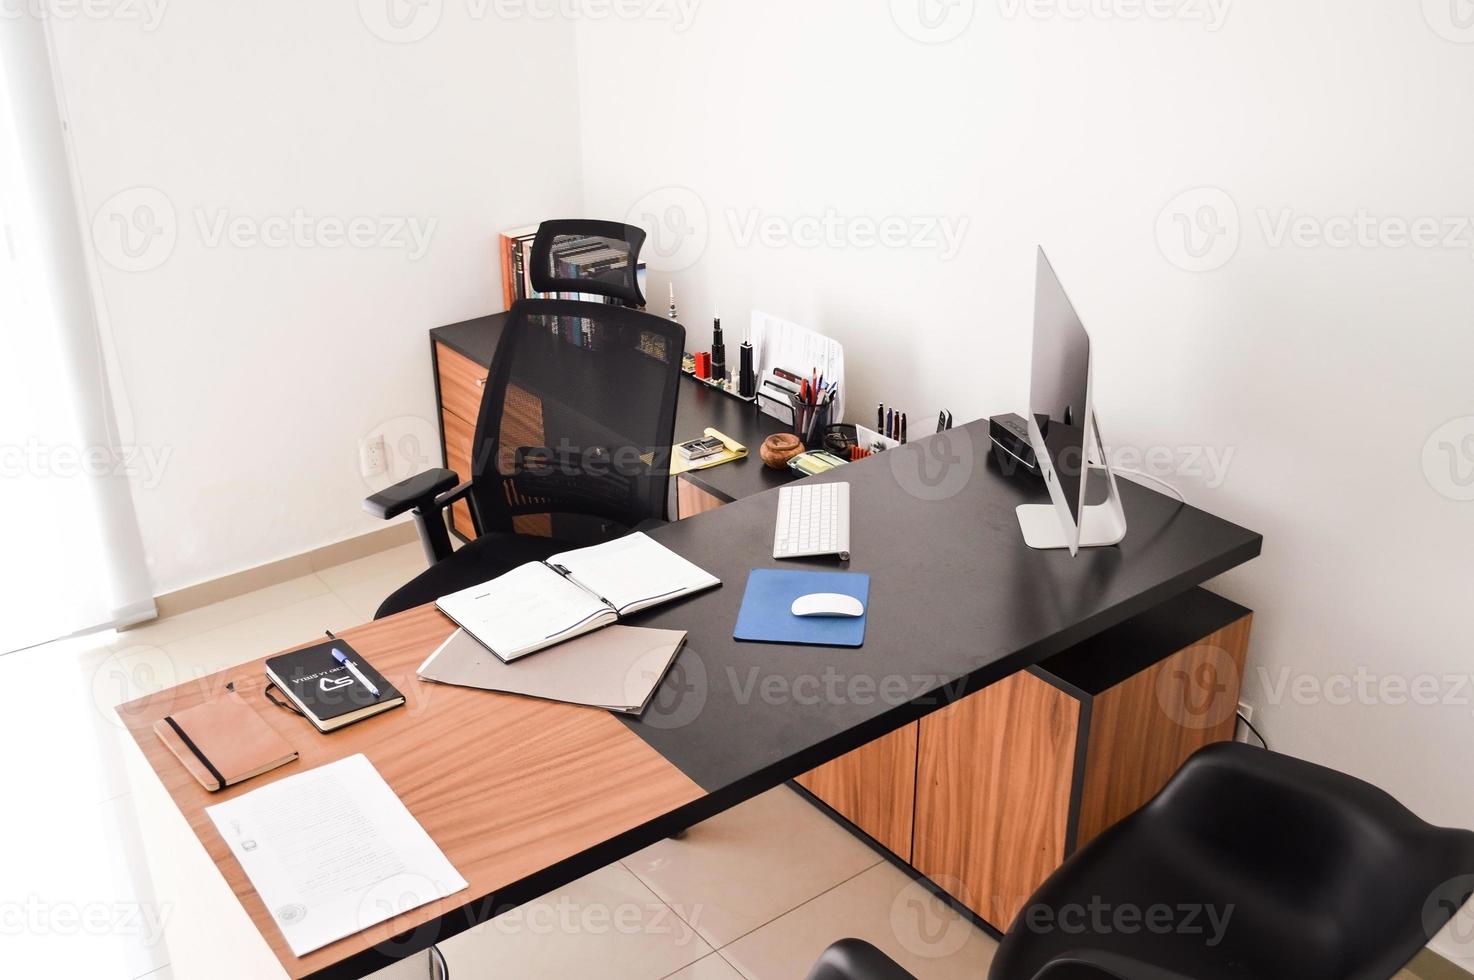 modern designer desk for office, business and creative spaces, Wooden desk in black color with storage drawers. photo